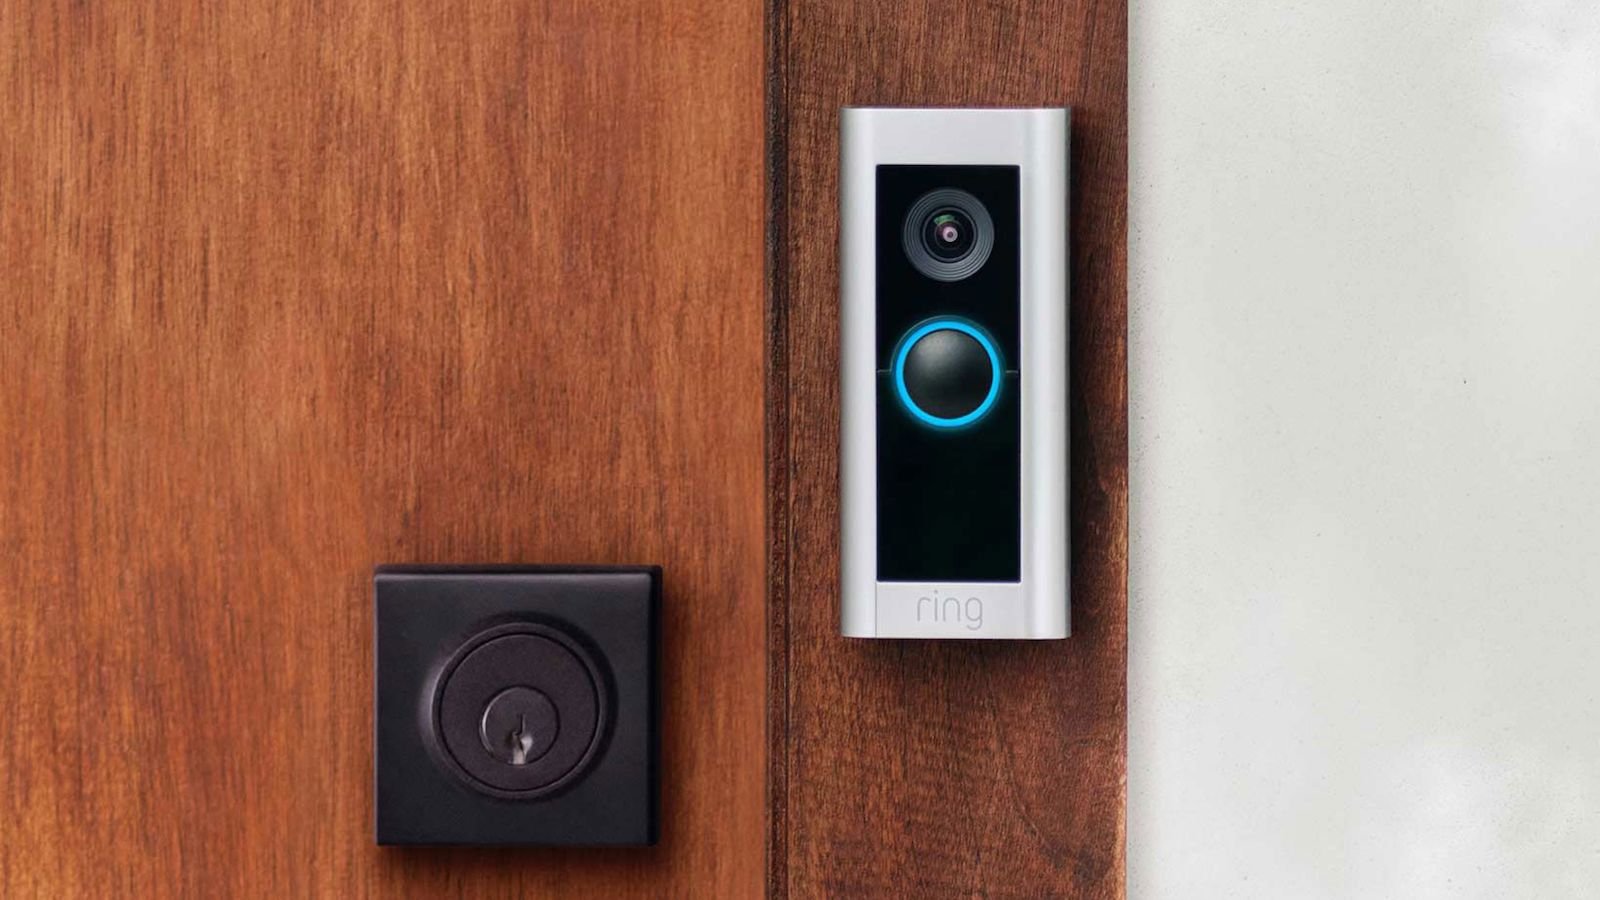 Ring Video Doorbell Pro 2 comes with updates, including an improved 1,536p HD video